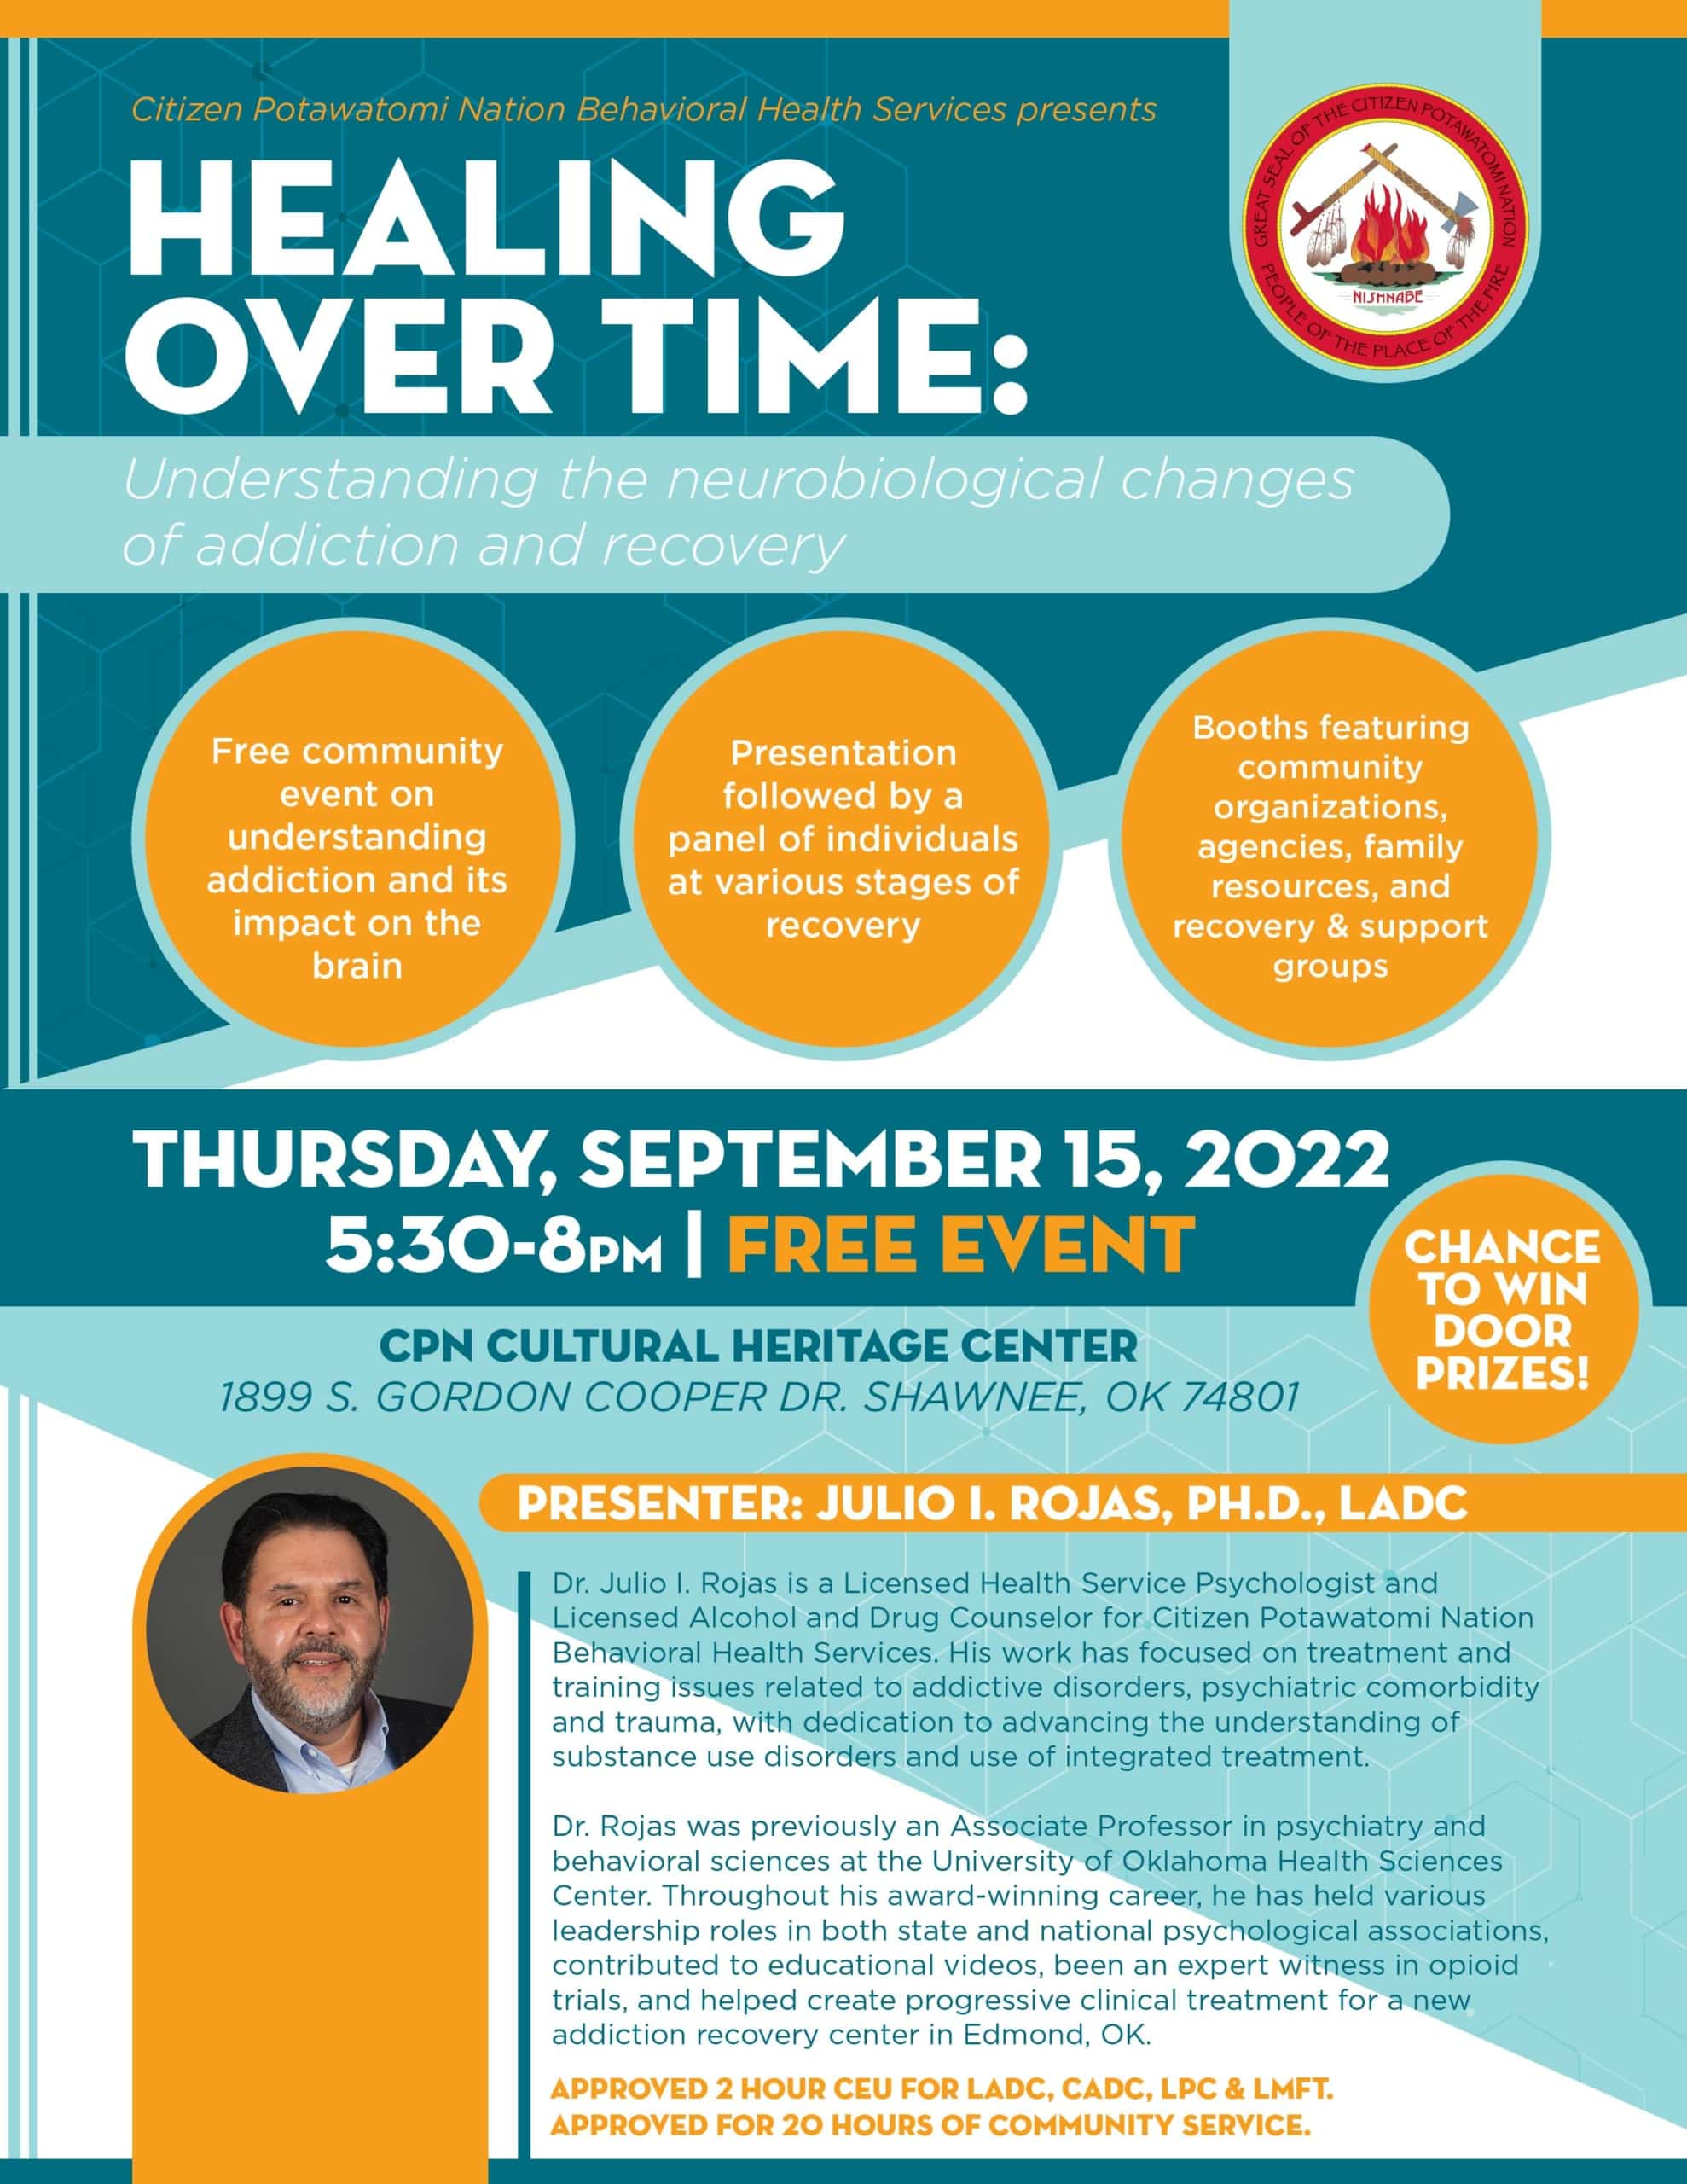 Teal and orange flyer advertising the "Healing over time: understanding the neurobiological changes of addiction and recovery" event. The event will be held on at the CPN Cultural Heritage Center on September 15 from 5:30-8:00pm, and is free to the public. A biography of presenter Dr. Julio Rojas as well as an outline of the program are given; all text is reproduced in the body of this event.